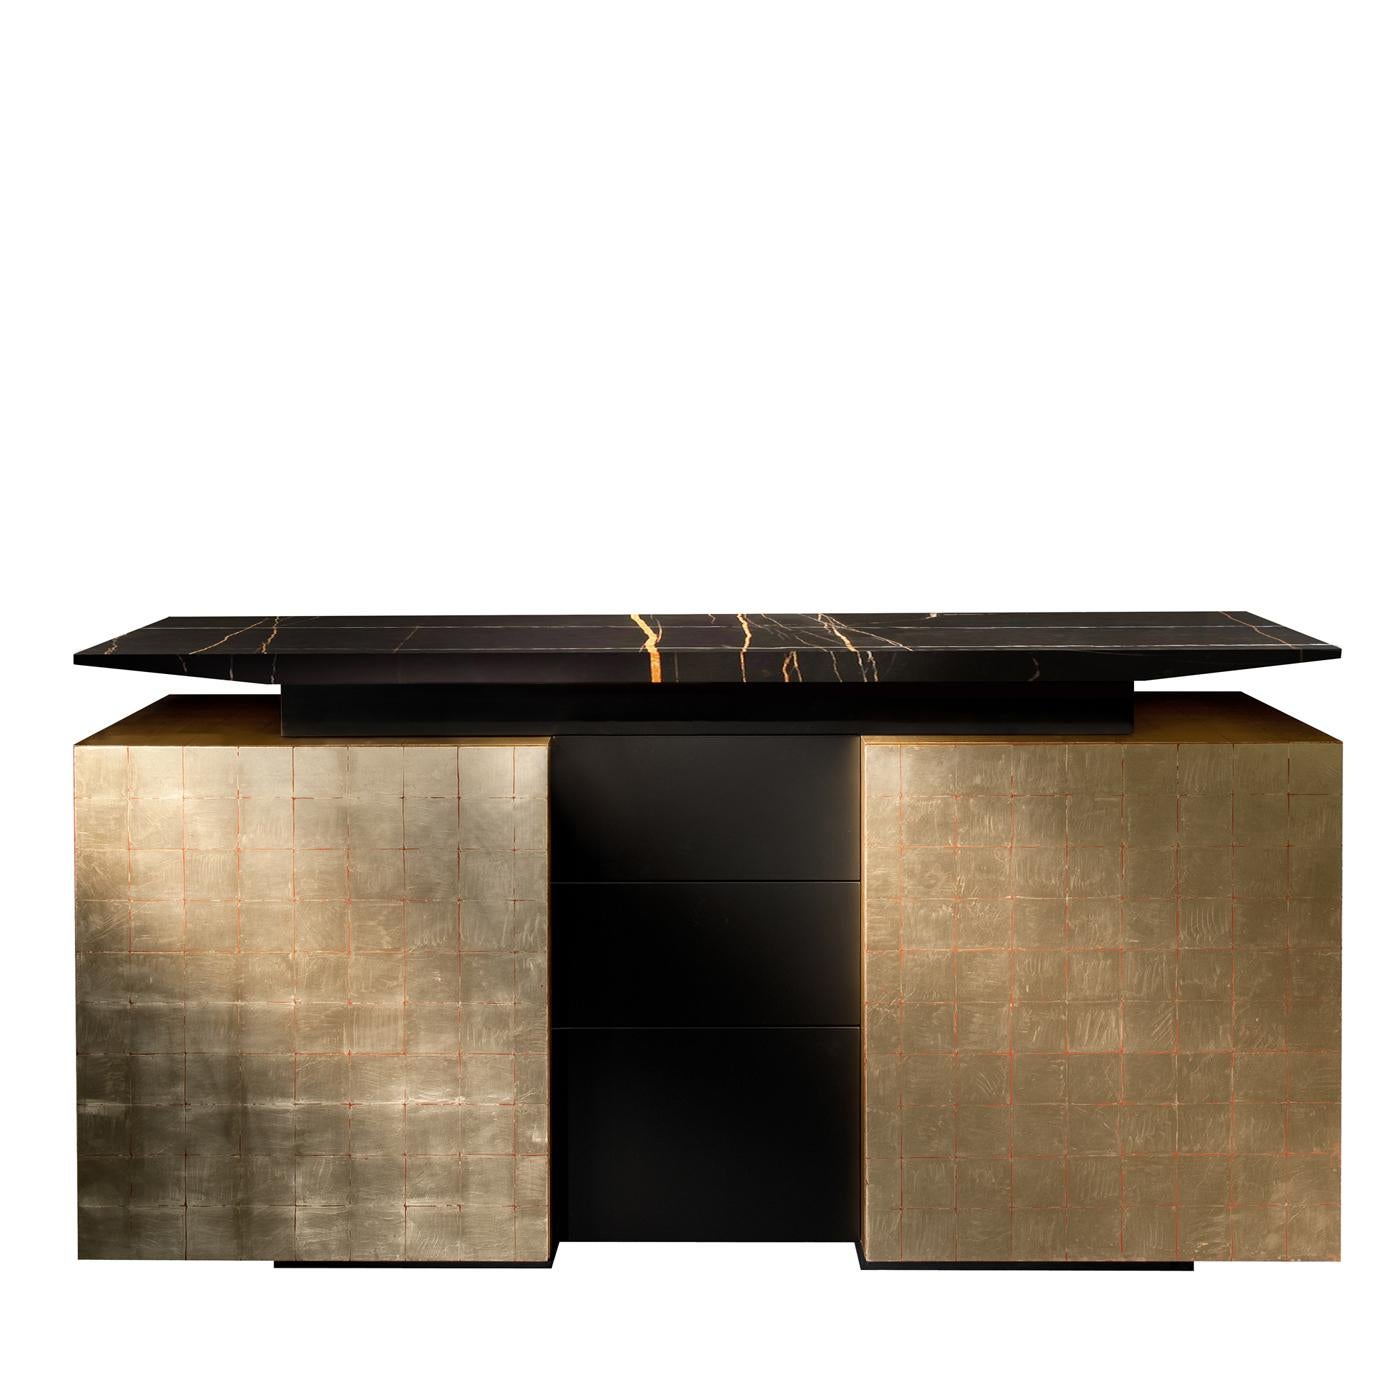 Modern sophistication and a unique, refined allure define this magnificent sideboard. A testament to impeccable craftsmanship, it is fashioned of wood with a Nero Guinea marble top showcasing bright, natural veins. The two doors with inner shelves